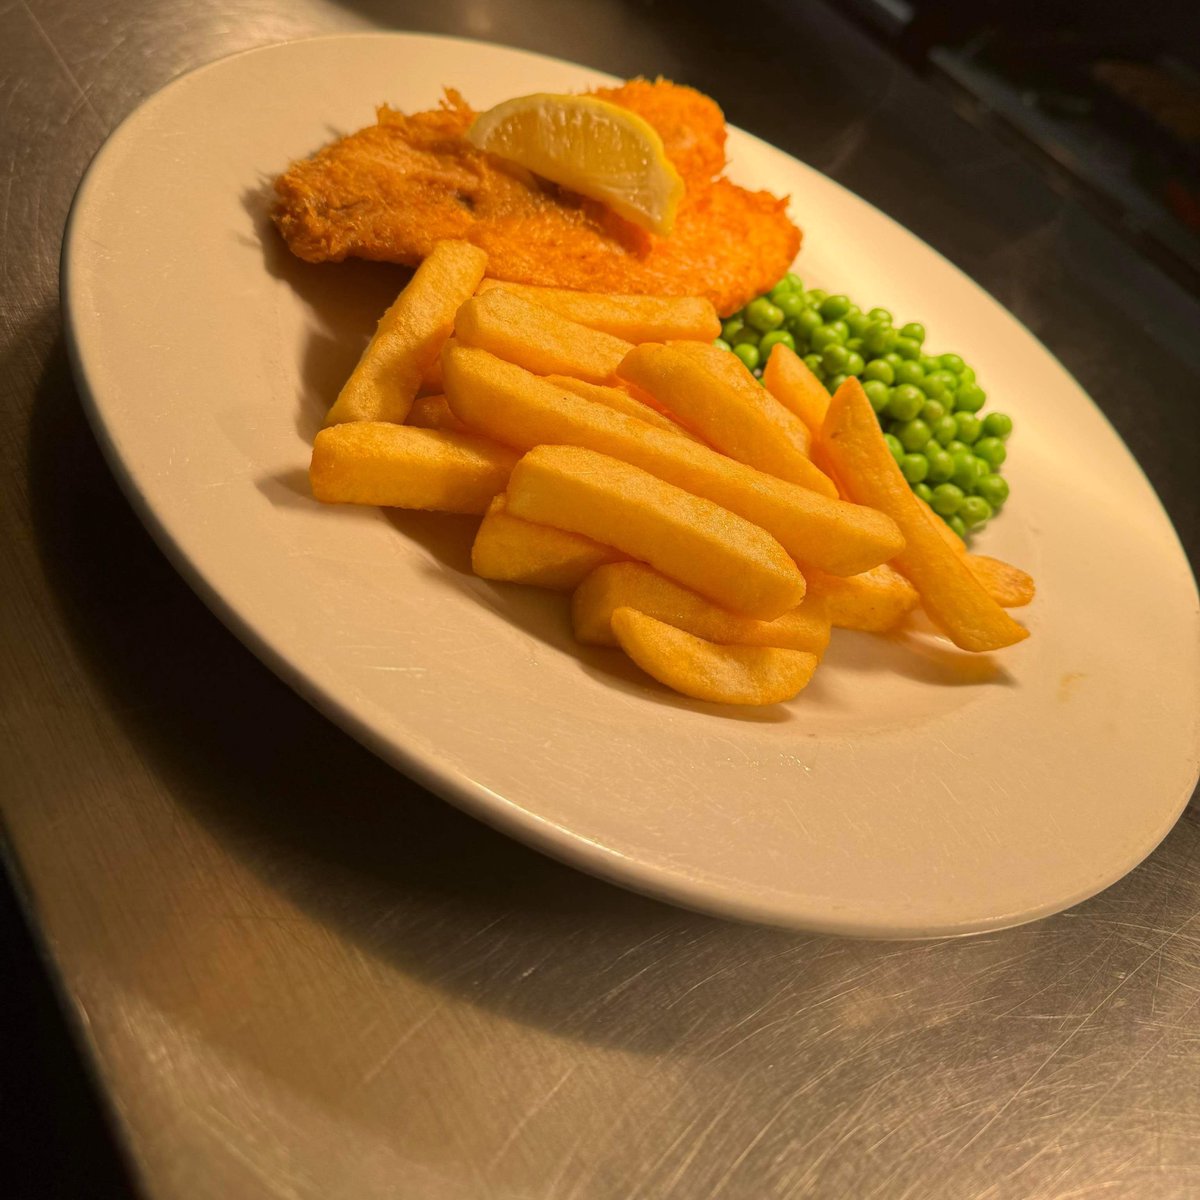 Who fancy’s Fish and Chips , 2 classic meals for £11.49 🍽️
#classic #pub #fishchips #choice